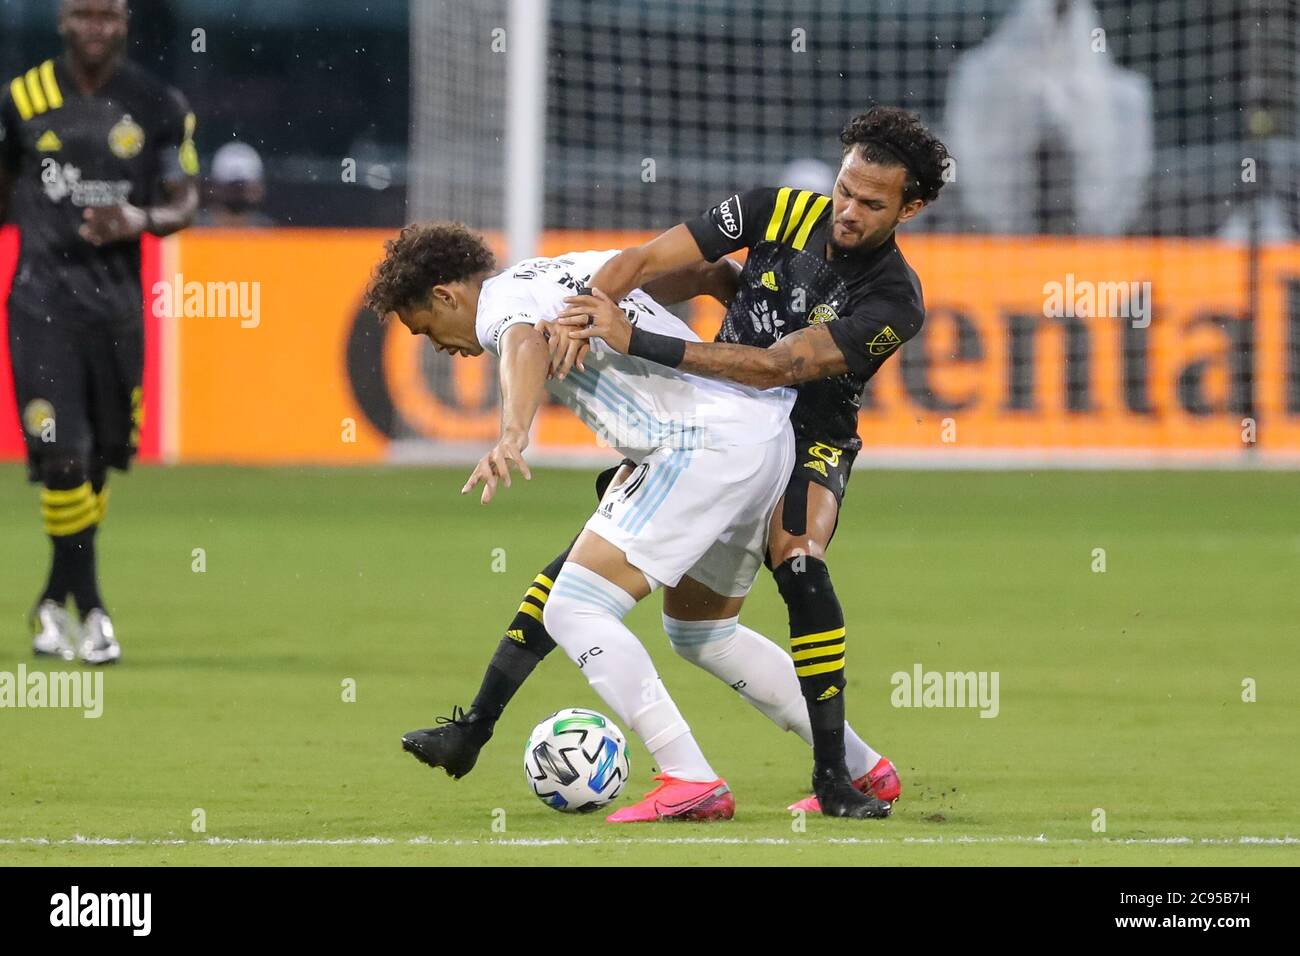 Orlando, Florida, USA. July 28, 2020: FC Cincinnati forward KEKUTA MANNEH (31) competes for the ball against Columbus Crew midfielder ARTUR (8) during the MLS is Back Tournament Columbus Crew SC vs Minnesota United FC match at ESPN Wide World of Sports Complex in Orlando, Fl on July 28, 2020. Credit: Cory Knowlton/ZUMA Wire/Alamy Live News Stock Photo